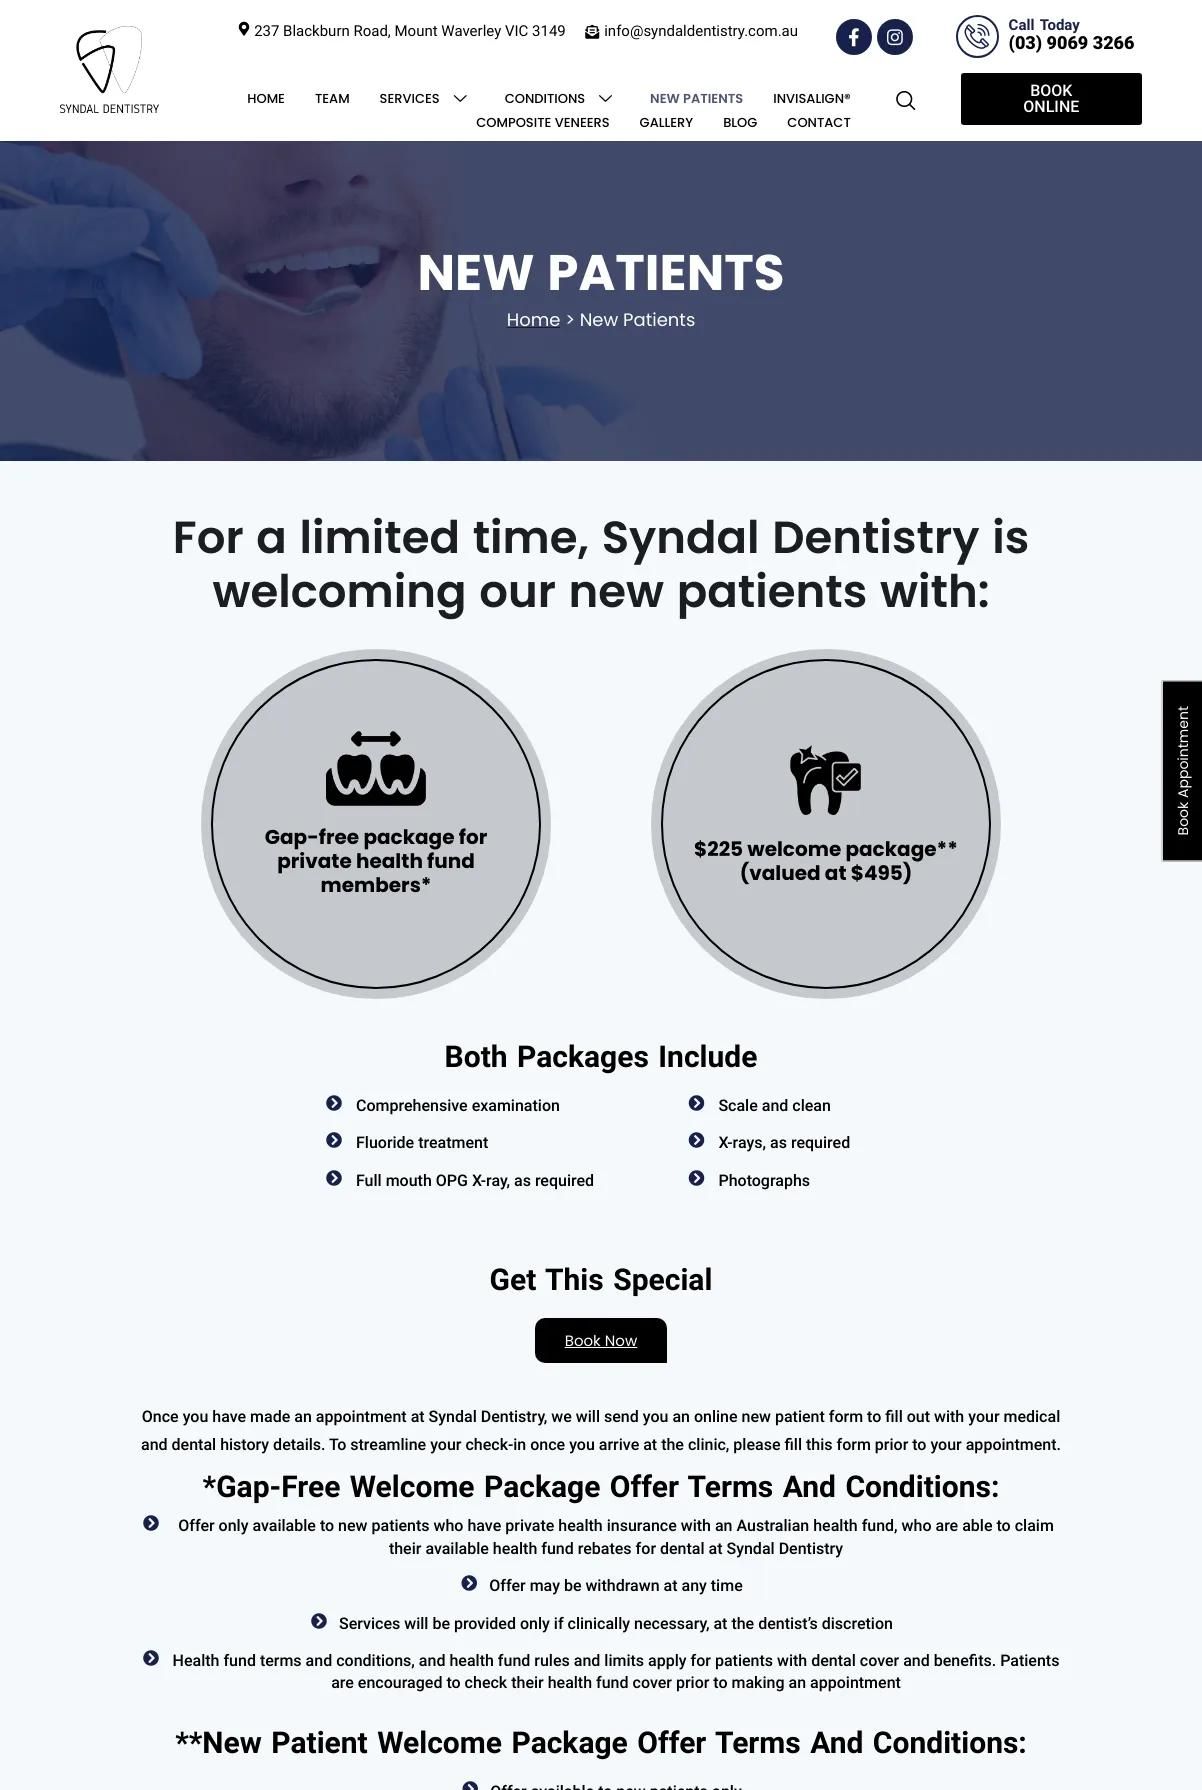 Screenshot 3 of Syndal Dentistry (Example Squarespace Dentist Website)